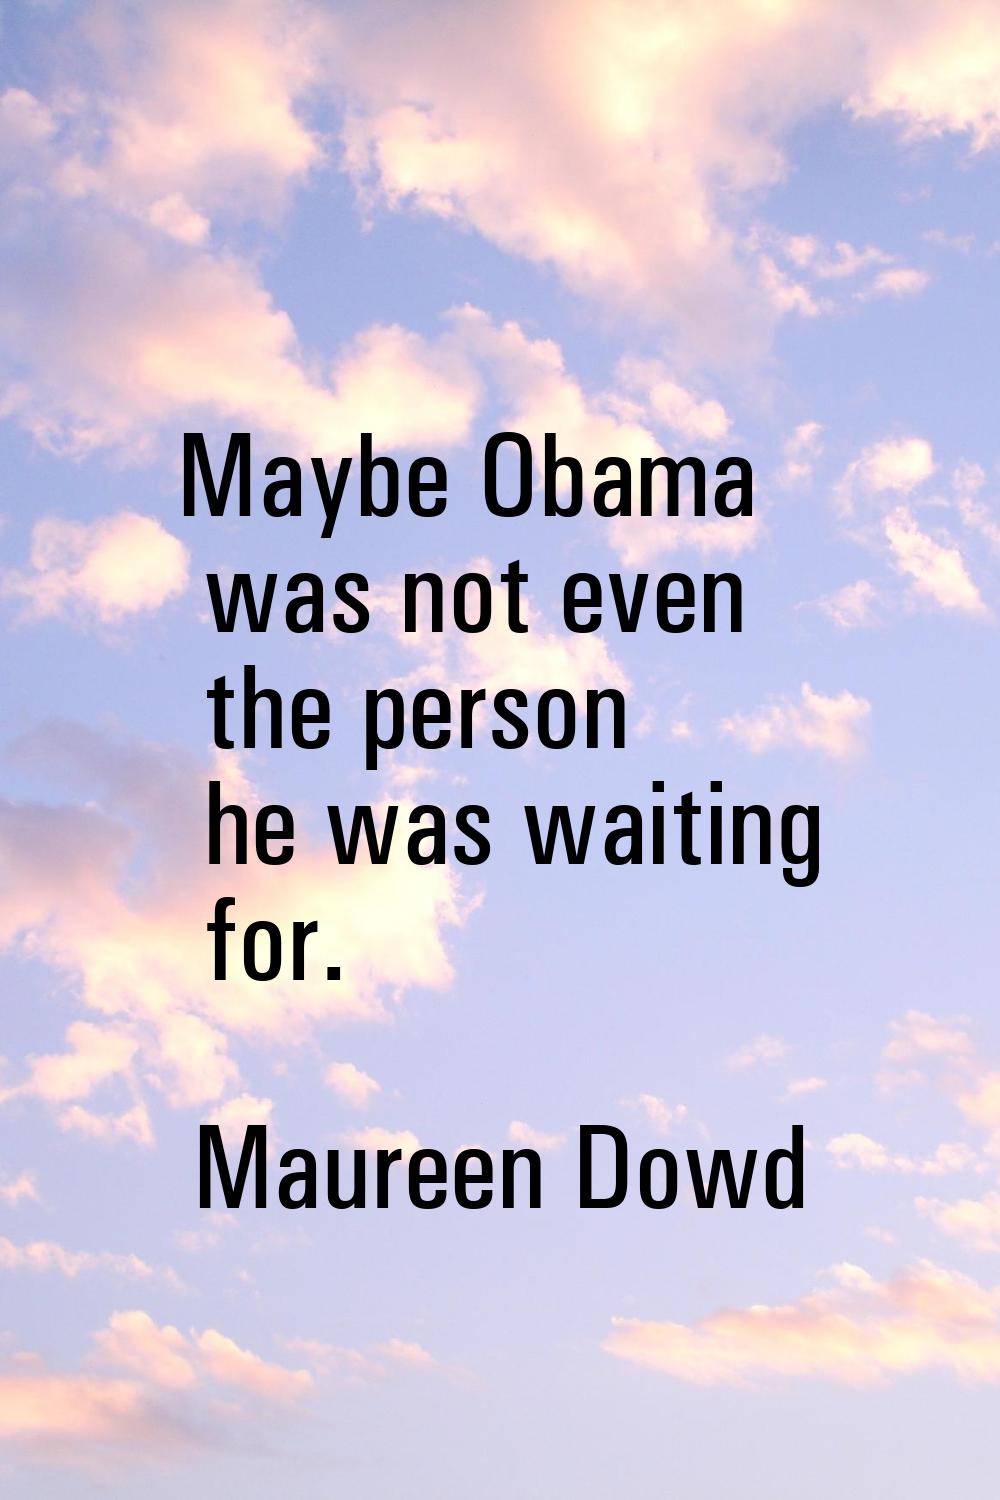 Maybe Obama was not even the person he was waiting for.